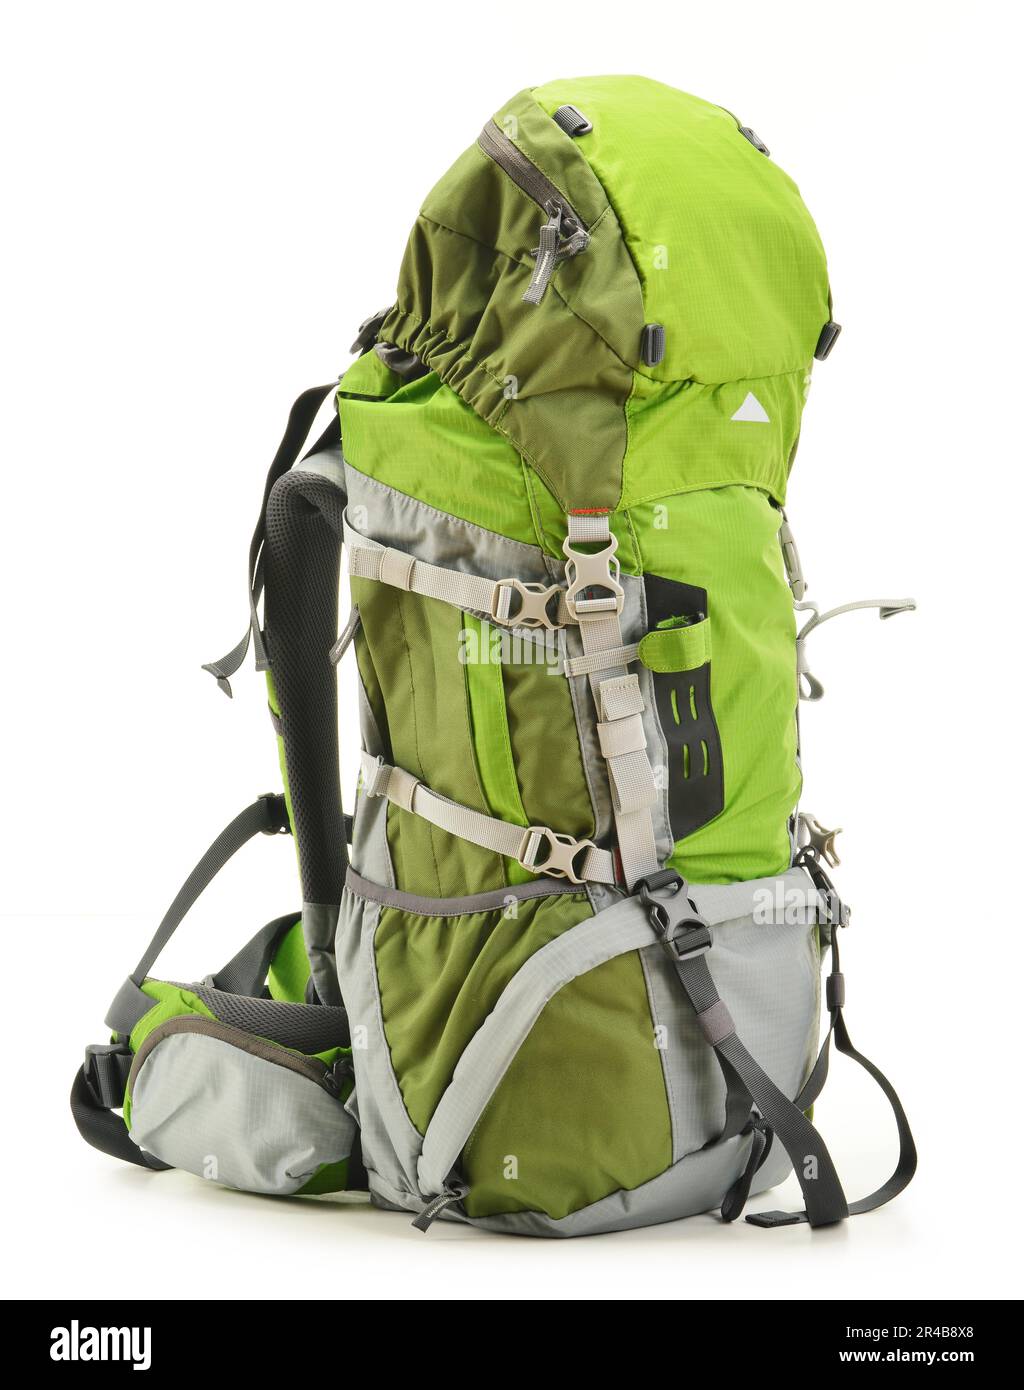 Large green touristic backpack isolated on white Stock Photo